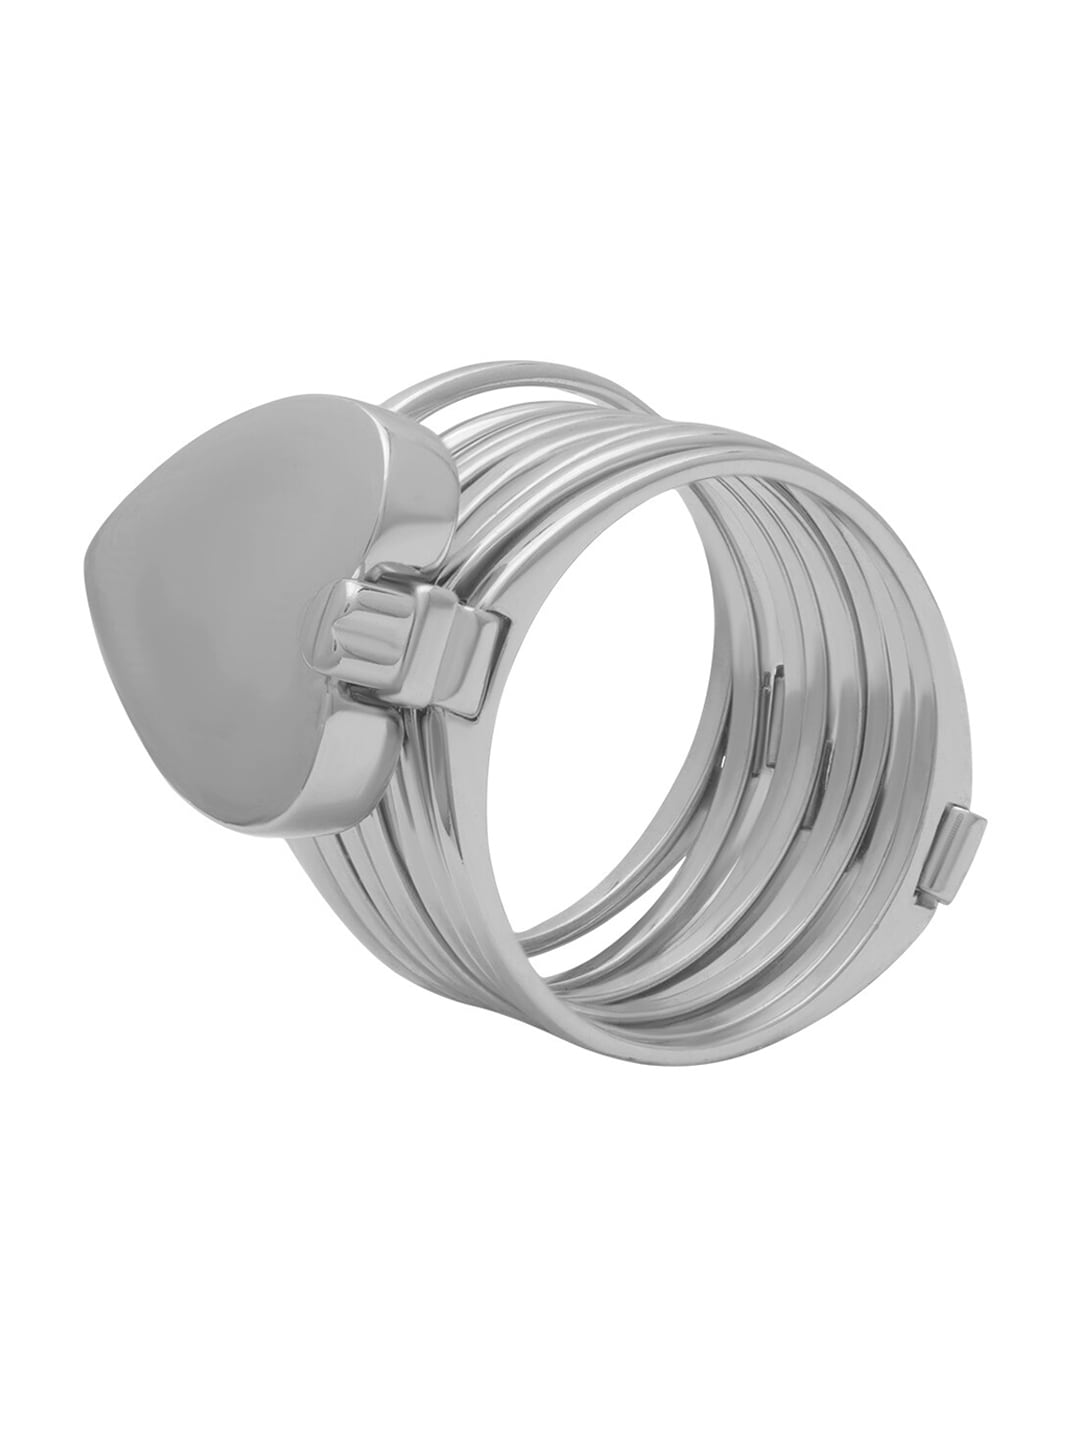 ANAYRA Women Silver-Toned 925 Sterling Silver Ring Price in India